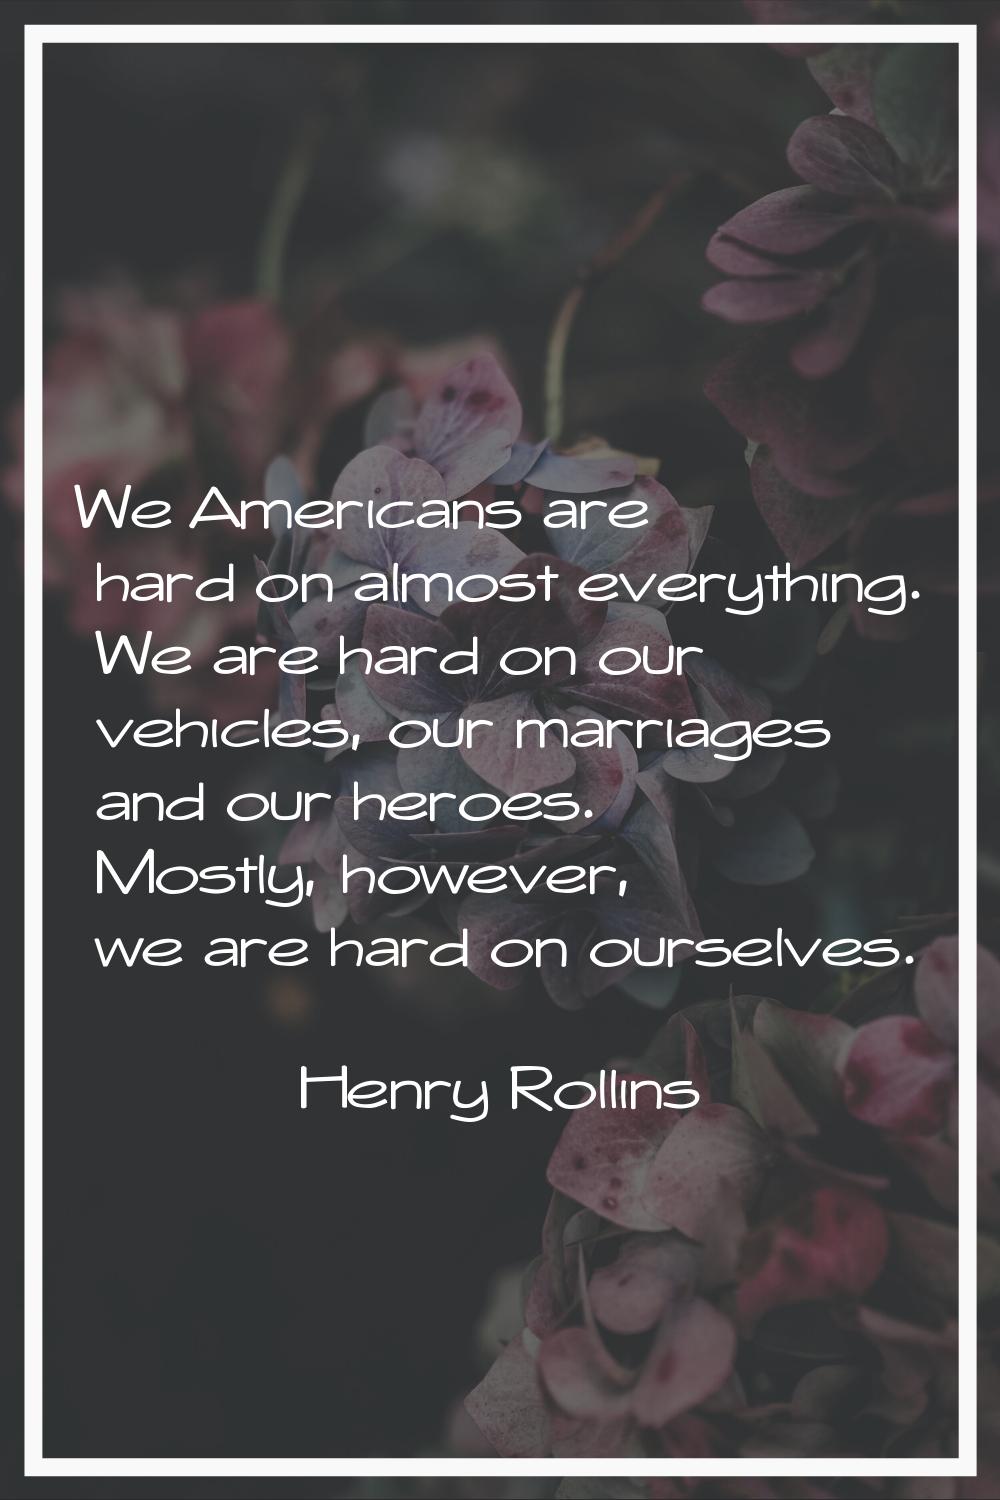 We Americans are hard on almost everything. We are hard on our vehicles, our marriages and our hero